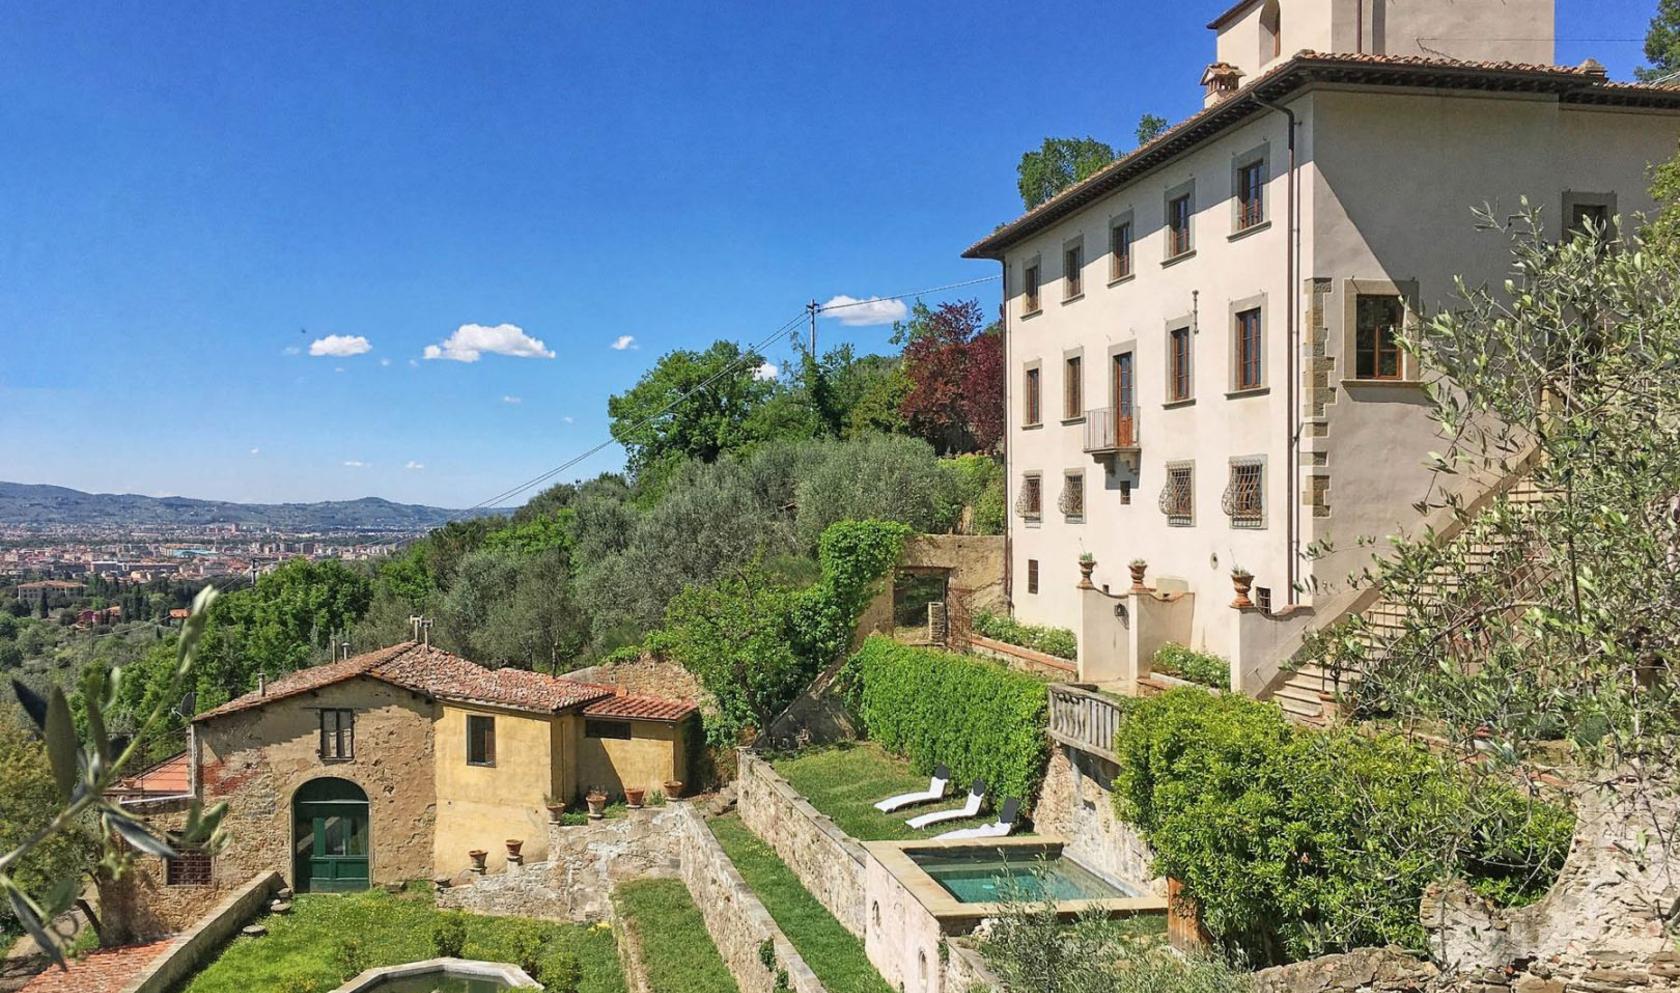 Toscana Immobiliare - Renaissance luxury villa for sale in Florence